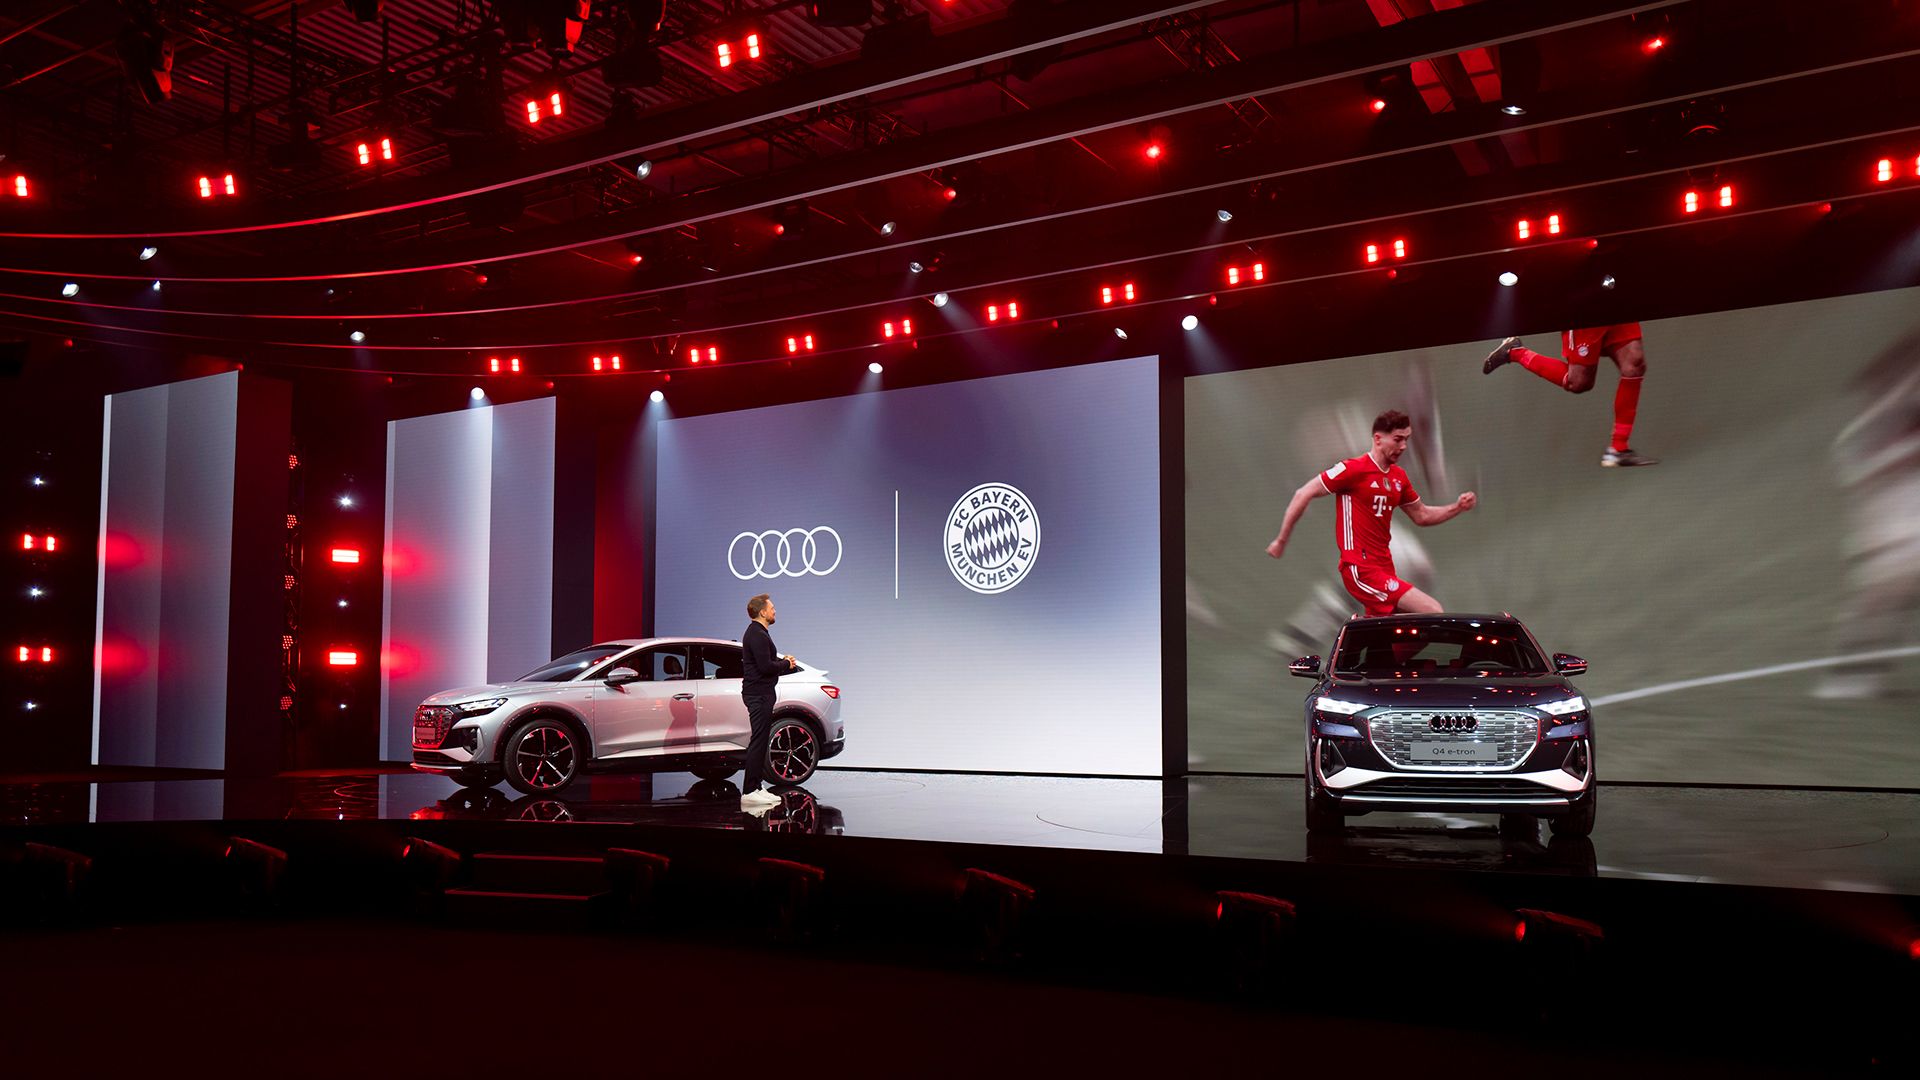 Two Audi models on the stage. The screen is showing soccer players.